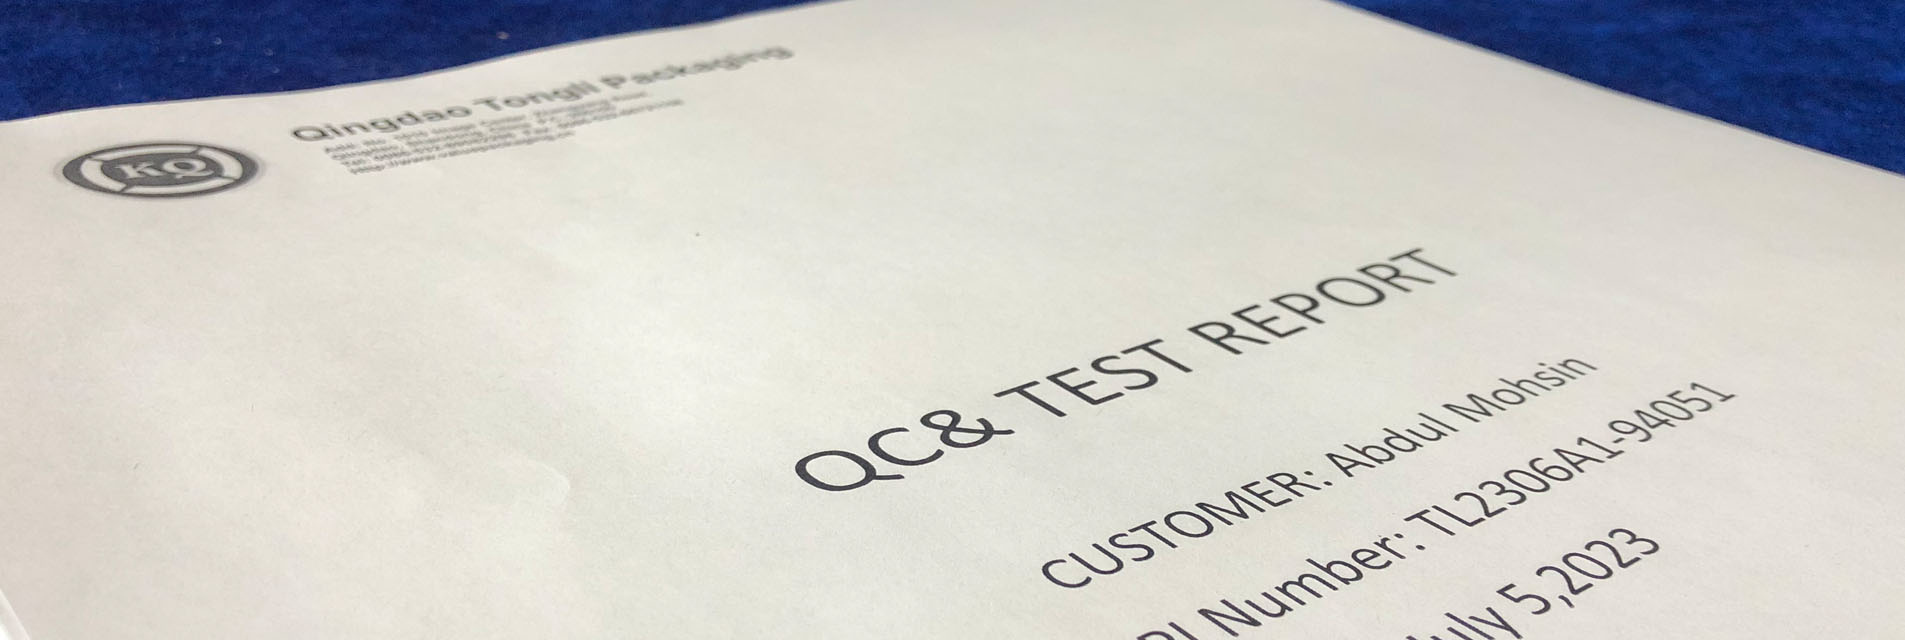 QA Report Issued </br>Against Customer Order